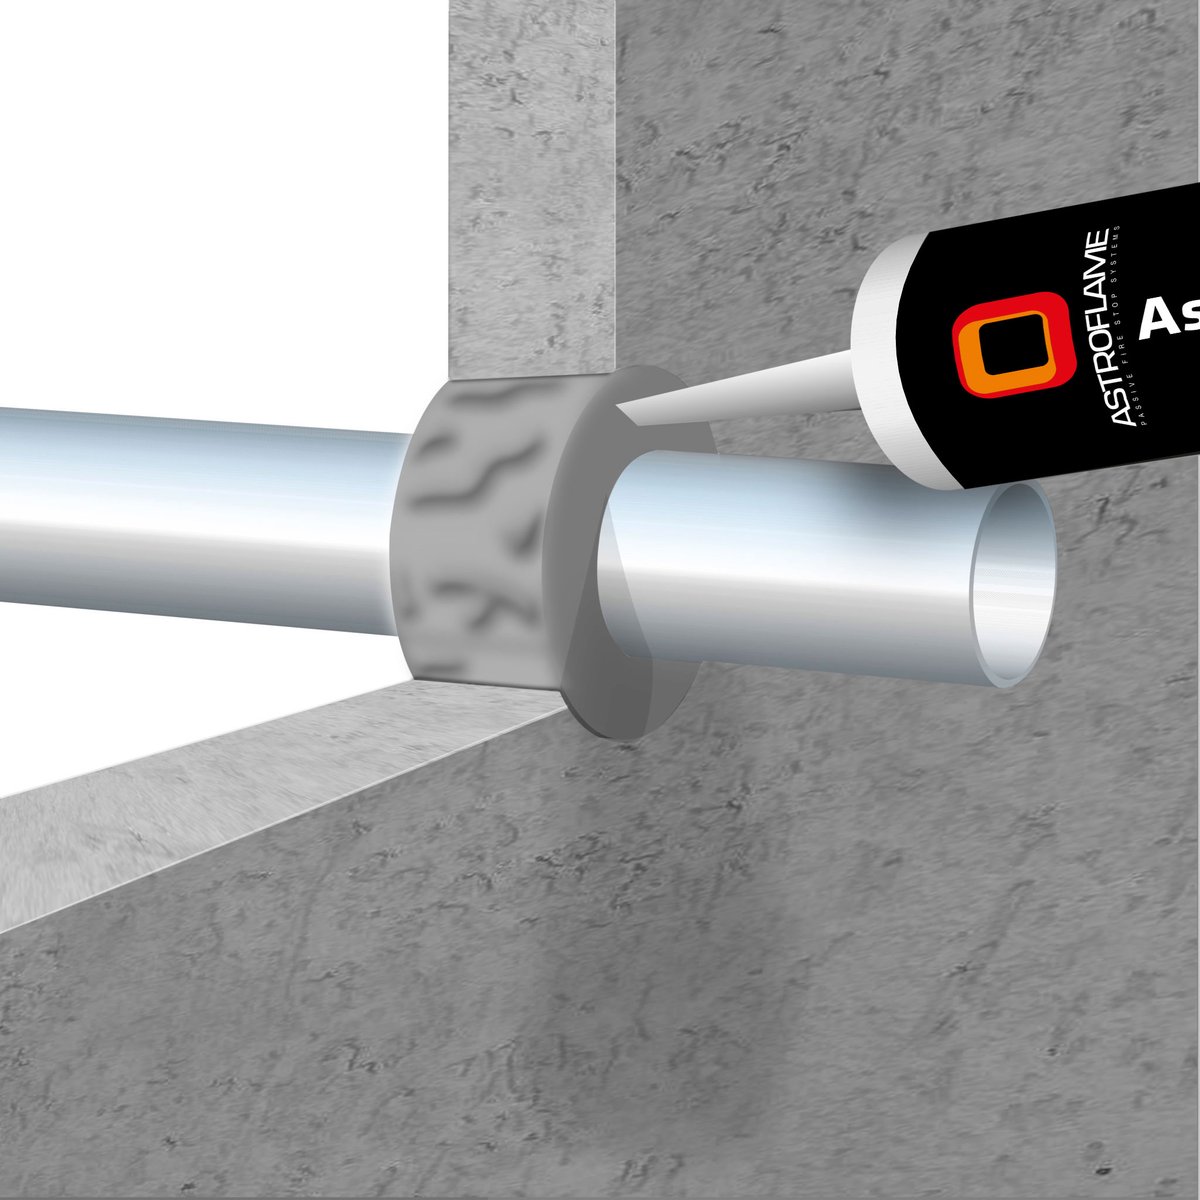 A high specification formulation designed to prevent the spread of fire | Easy to apply | High sound insulation | Hardens quickly, tack free after 1hr shop.stormflame.com/astro-pfp-fr-g… #astroflame #Construction #building #architecture #architect #Astro #PFP #FR #Graphite #firesafey #mastic